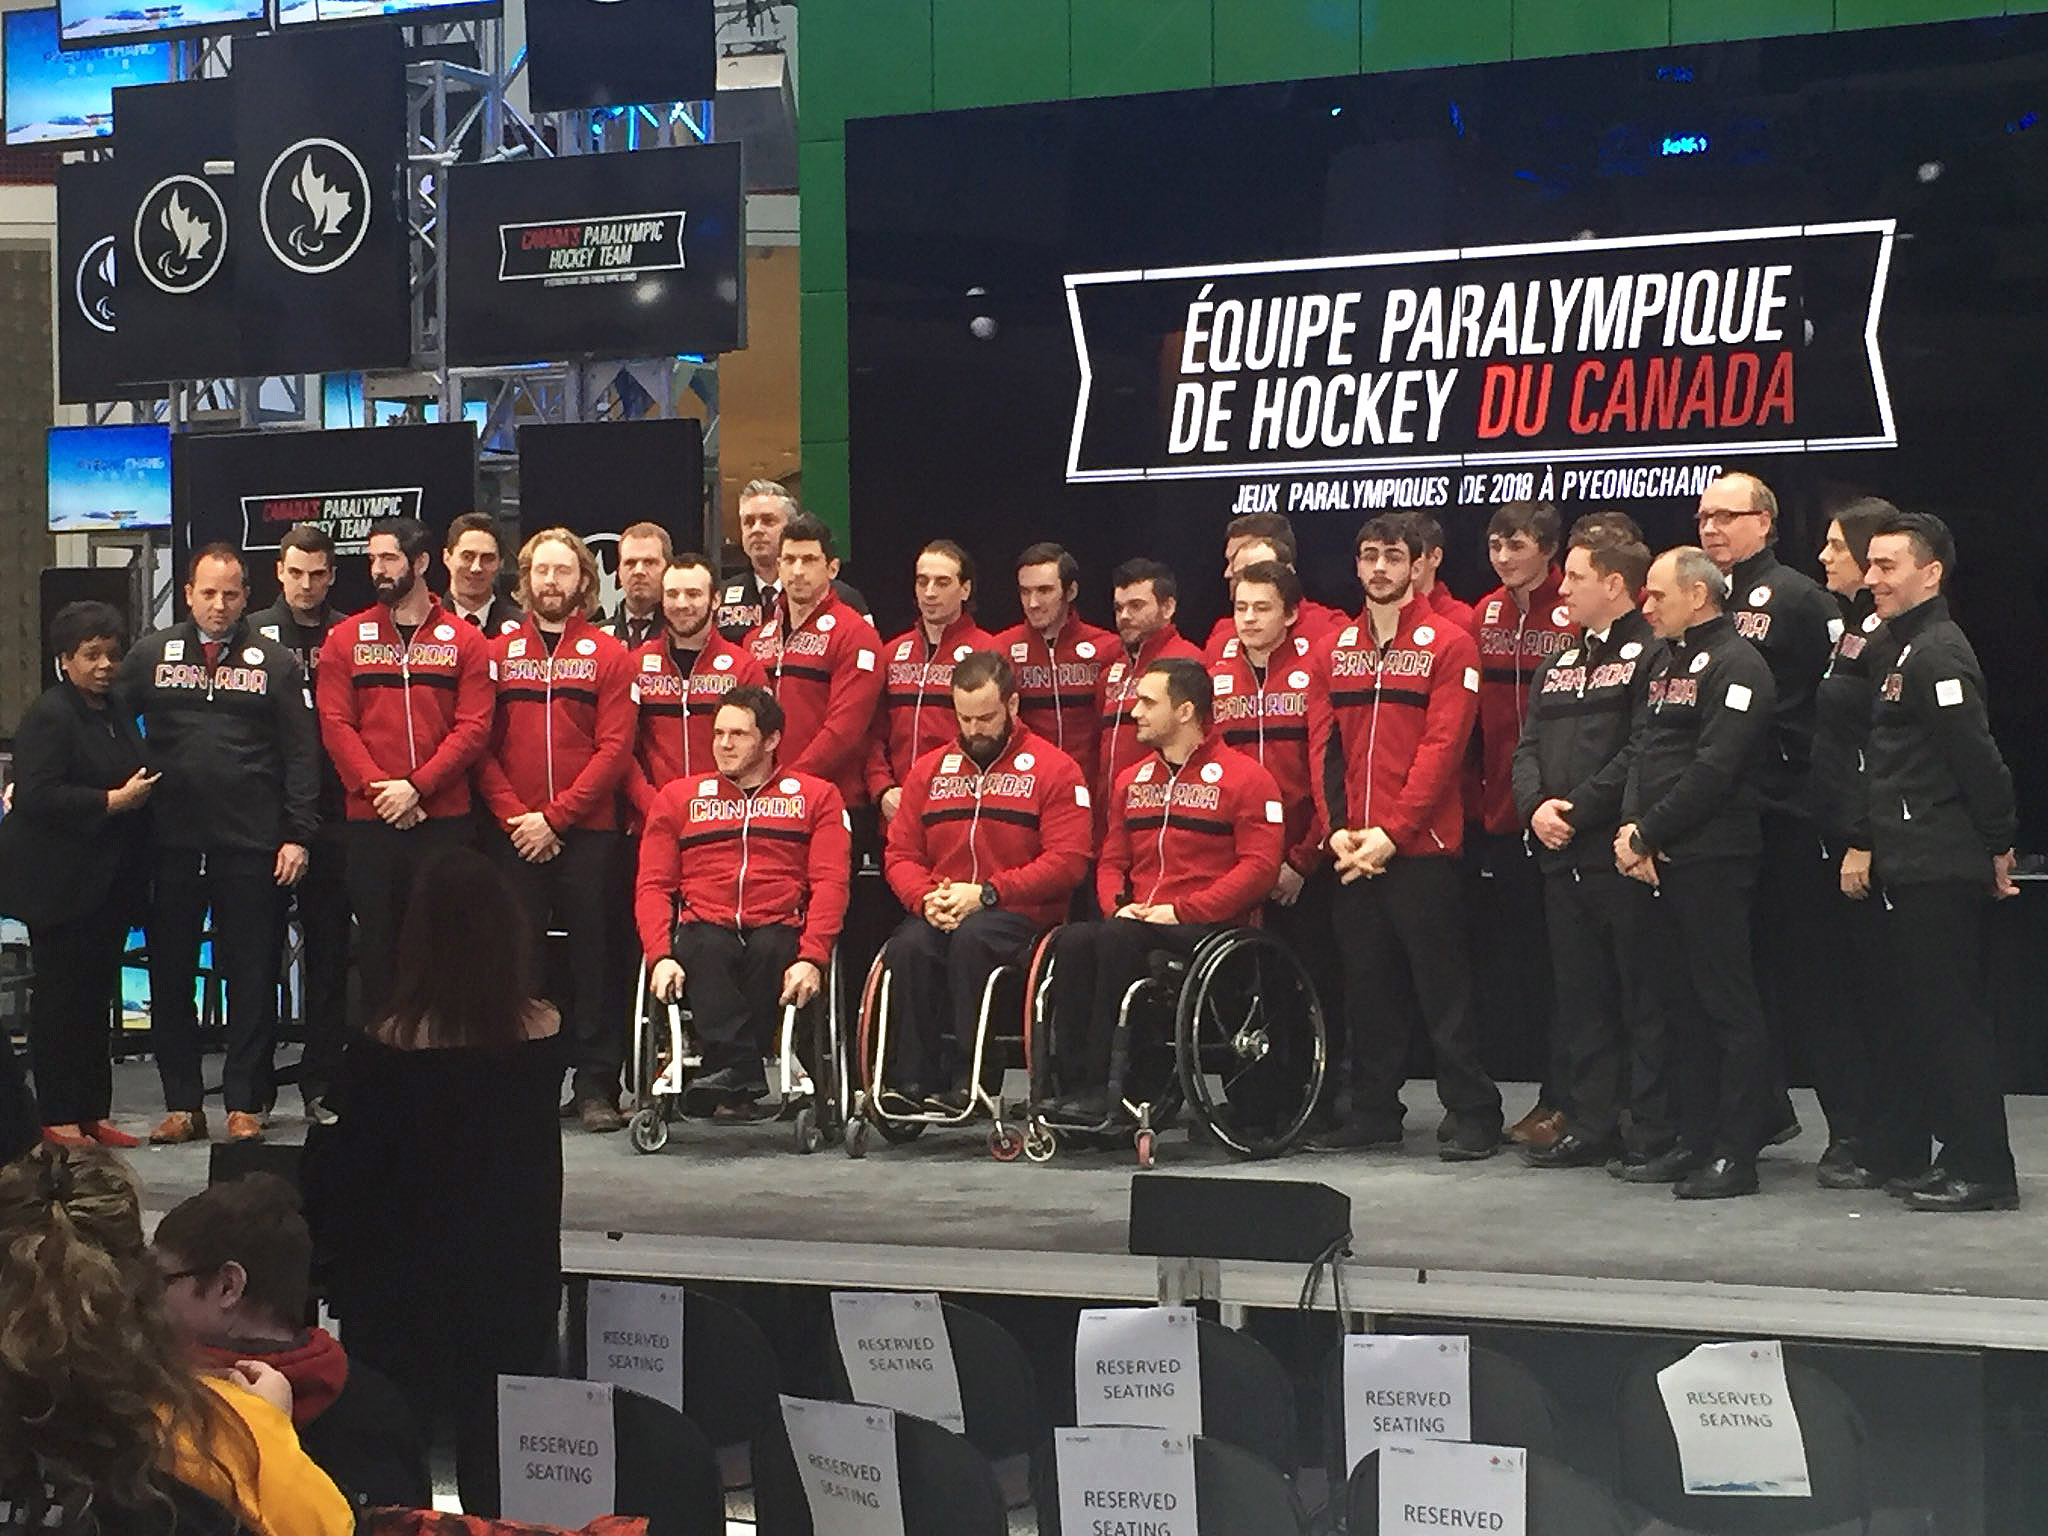 Canada's Para Hockey Team stands on stage posing for a photo. 